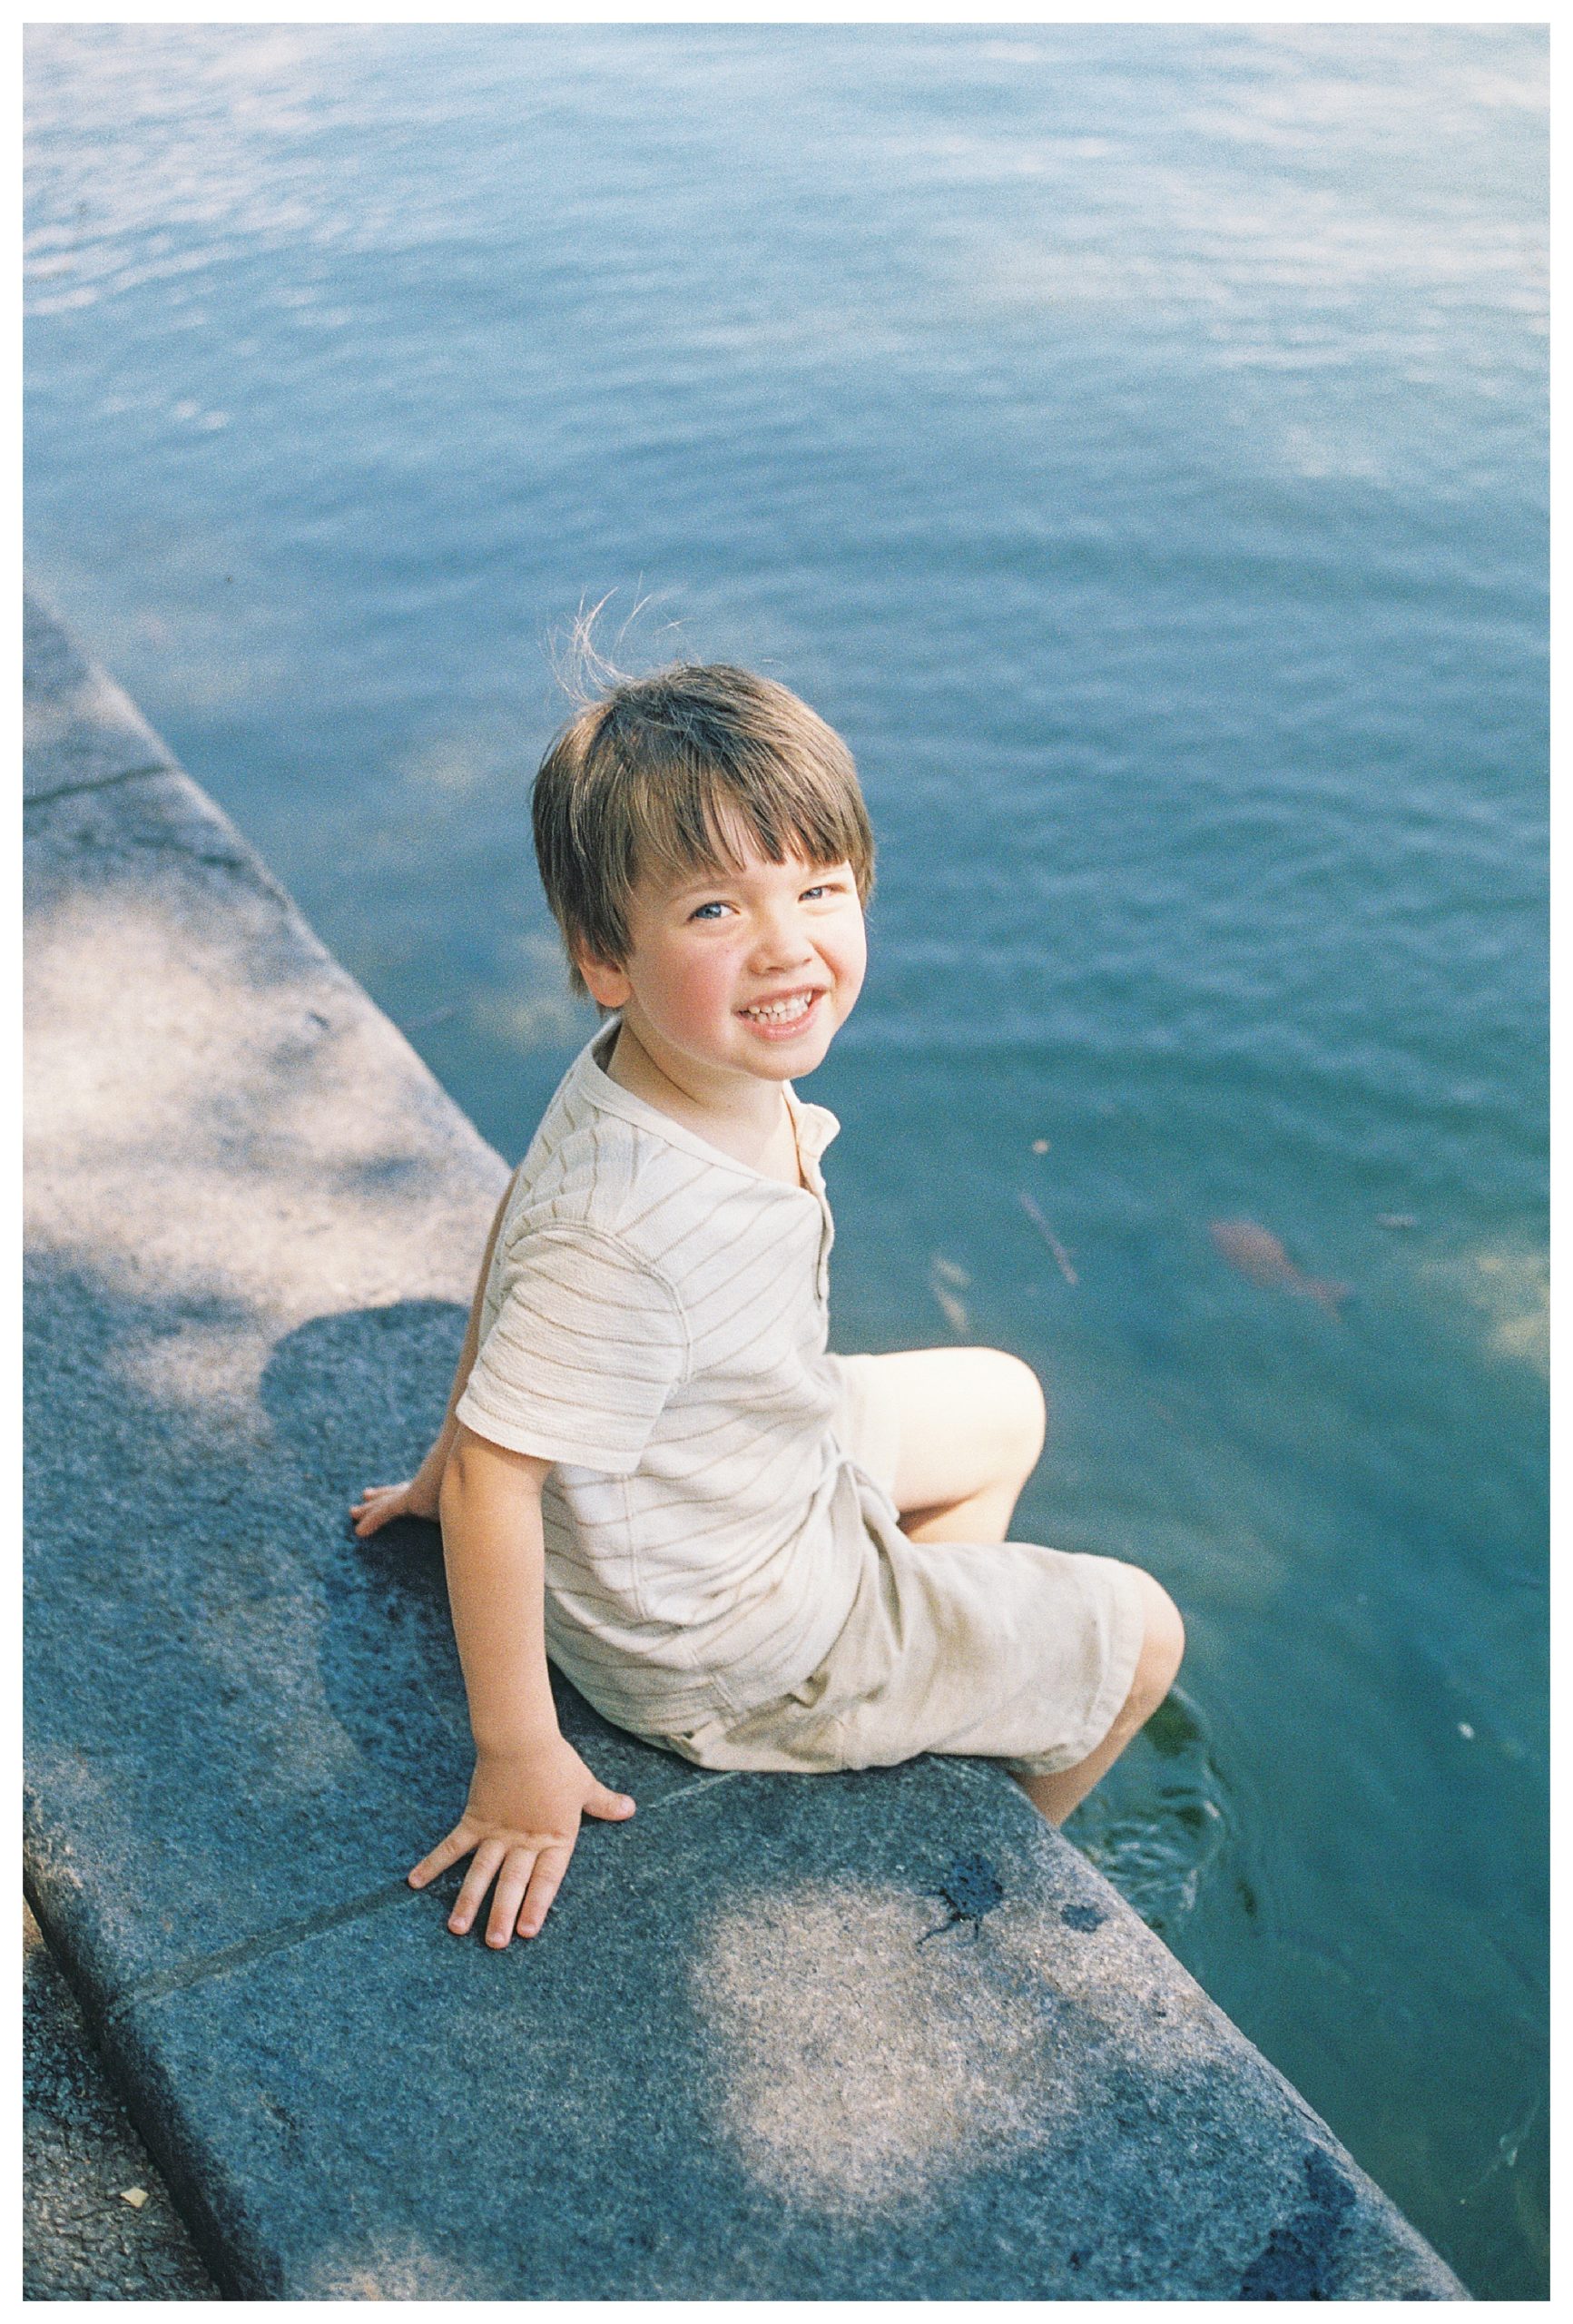 Toddler boy with blonde hair sits on the edge of a lake looking up and smiling